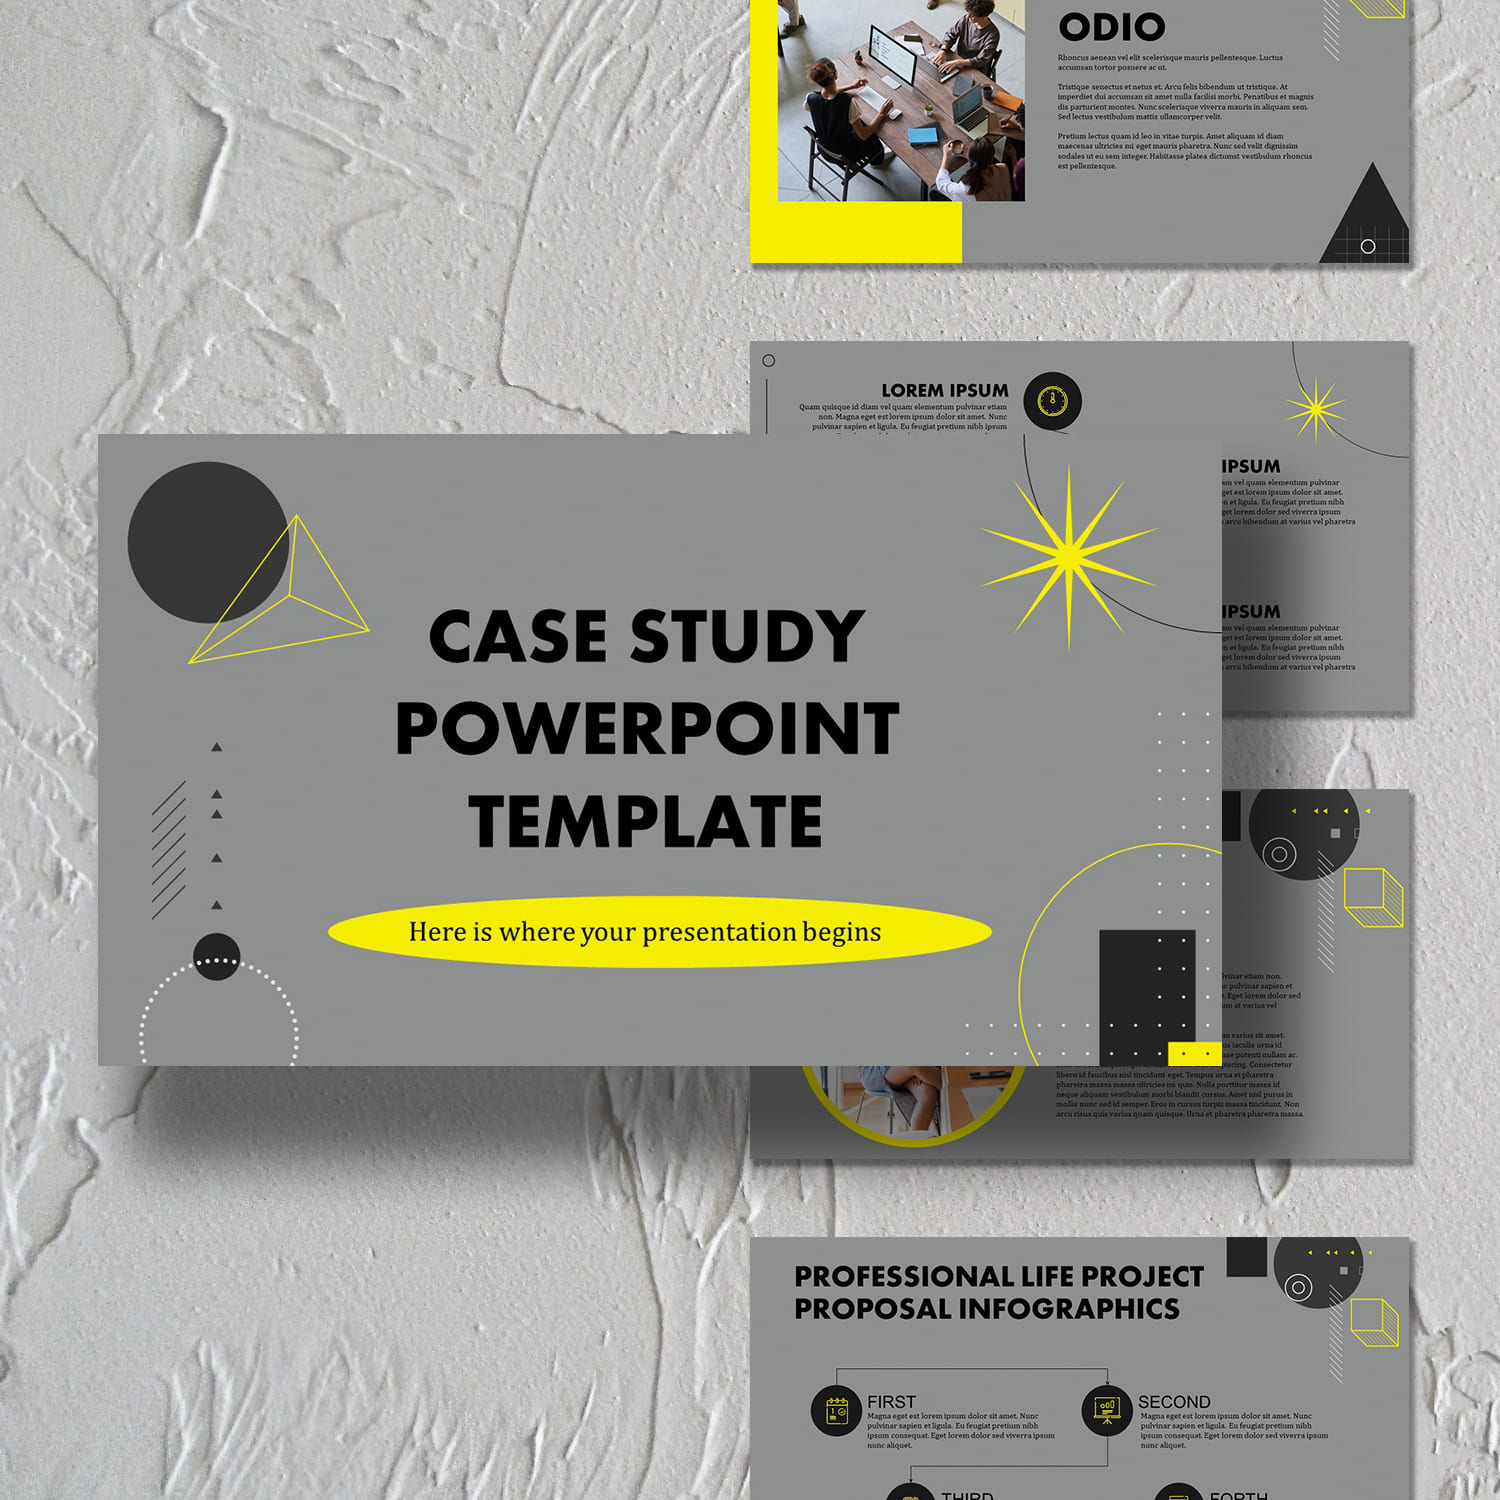 Case Study Powerpoint Template - main image preview.